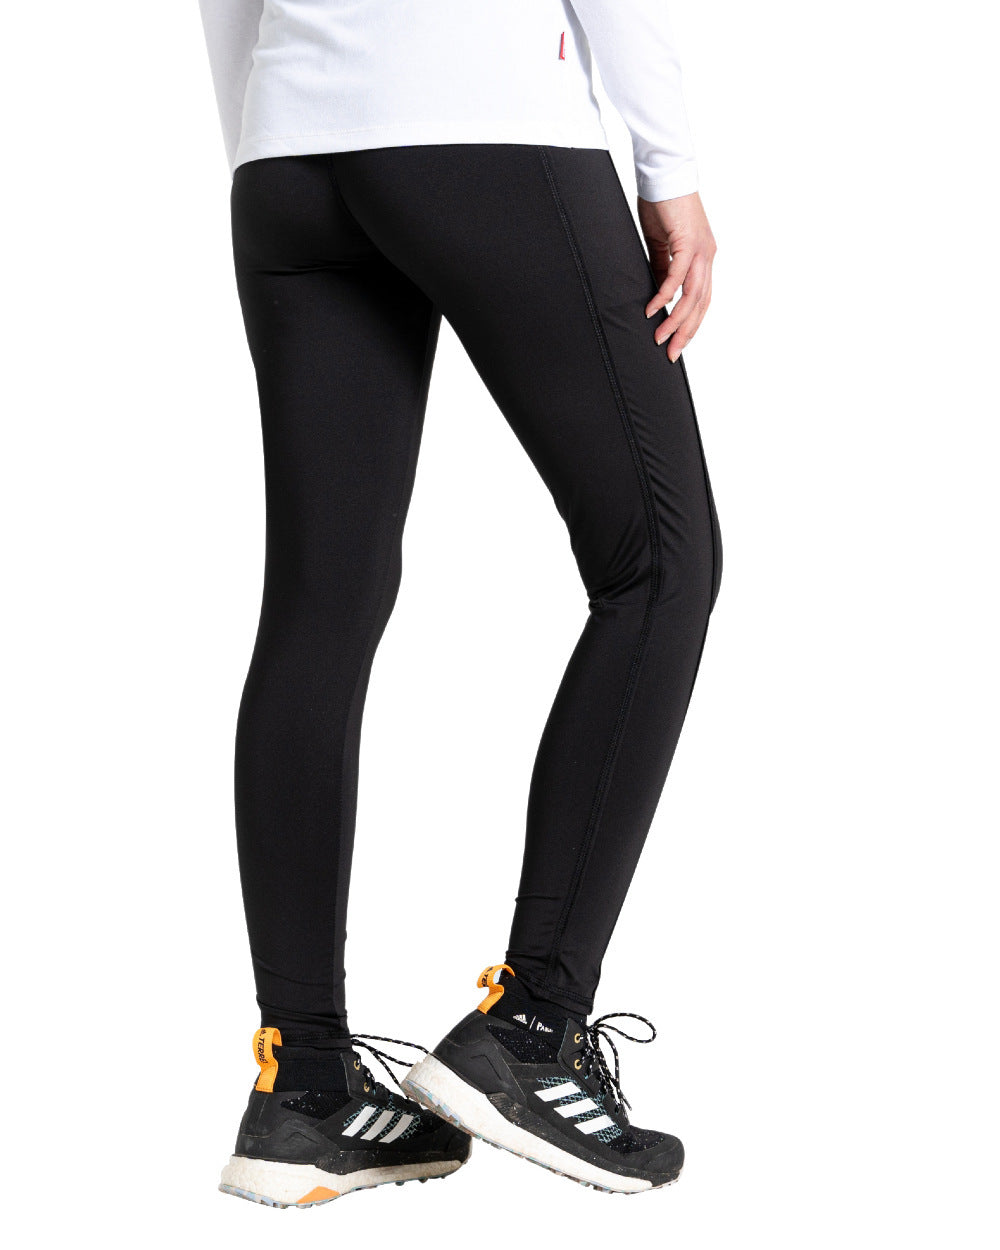 Black Coloured Craghoppers Womens NosiLife Durrel Leggings On A White Background 